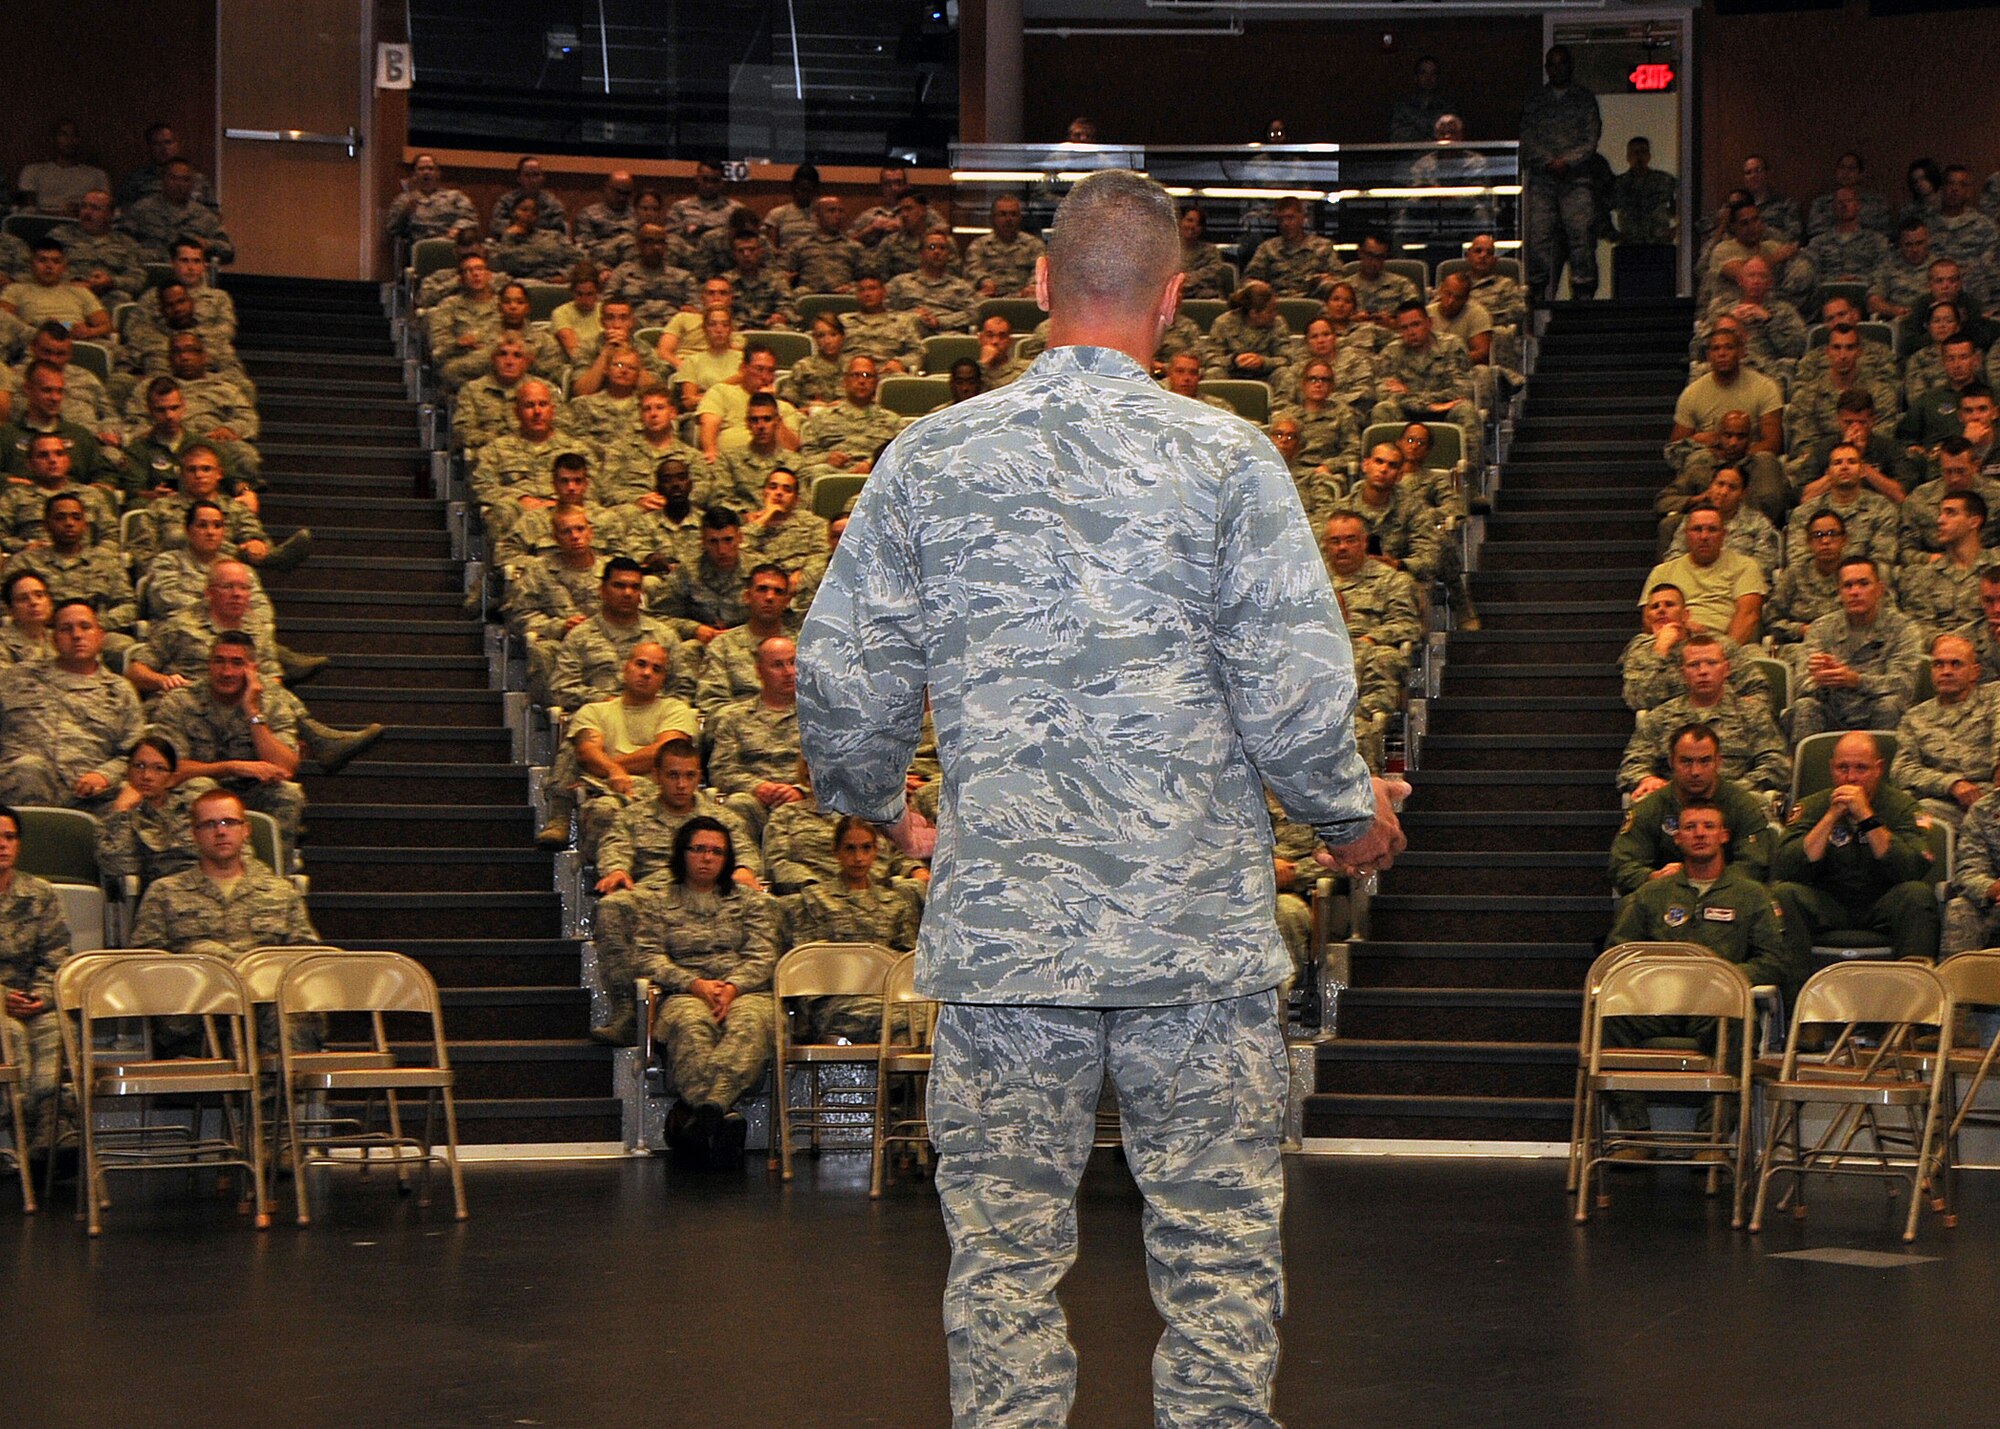 Colonel Arthur Floru, 143d Airlift Wing Commander, addresses the members of the 143d AW during the Rhode Island Air National Guard's annual Wingman Day on 3 August 2014. The event was held at the Knight Campus of the Community College of Rhode Island in Warwick, RI. National Guard Photo by Technical Sgt Jason Long (RELEASED)